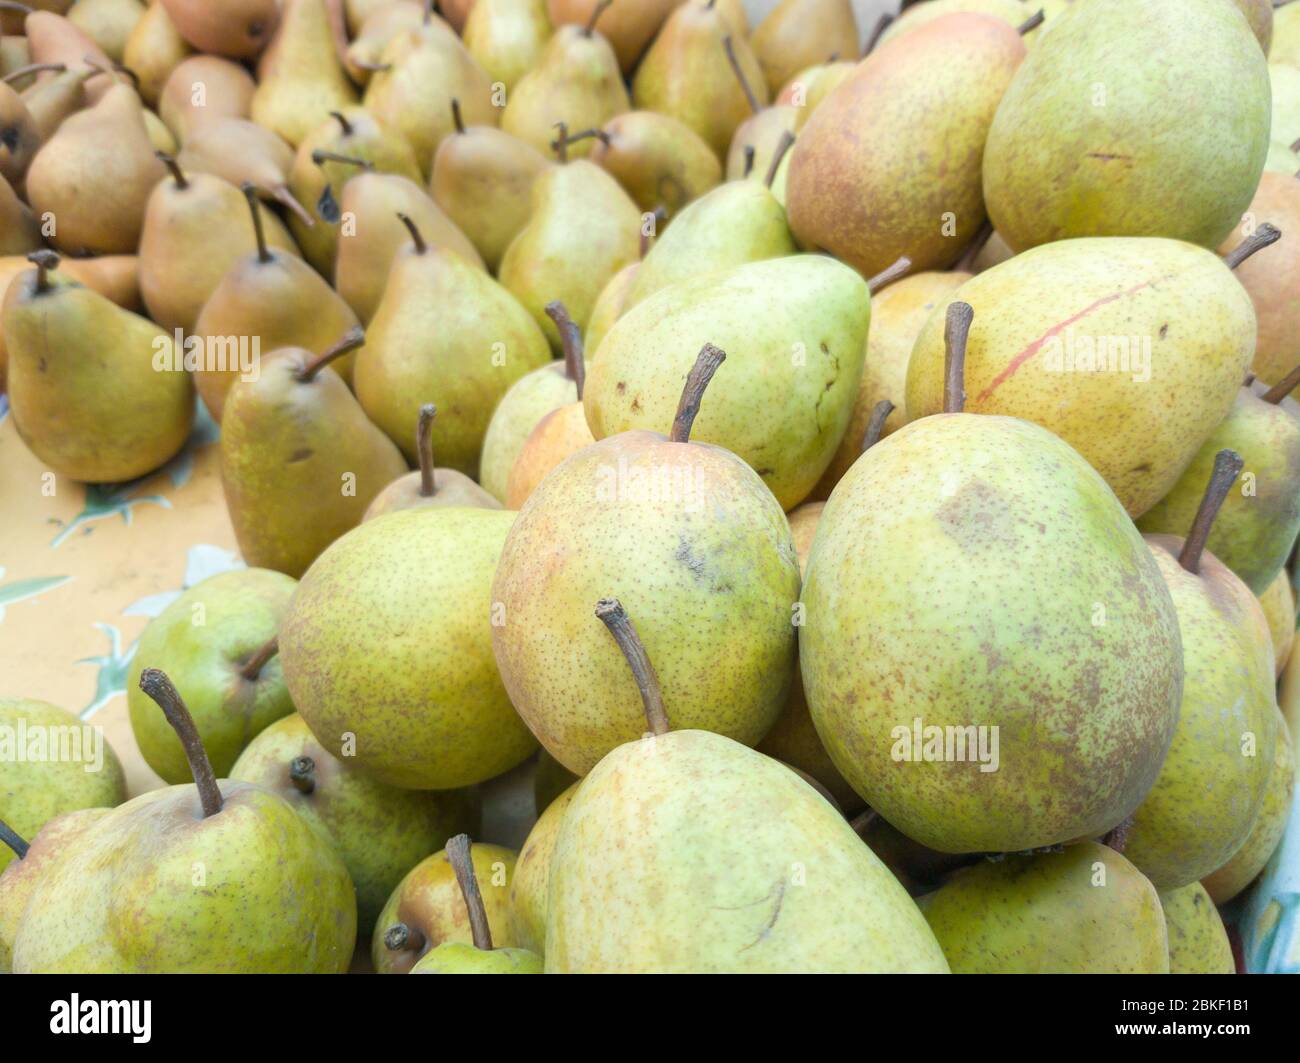 https://c8.alamy.com/comp/2BKF1B1/fresh-fruits-in-small-boxes-for-sale-on-the-farm-pears-with-stems-pears-at-the-farmers-market-food-market-fruit-stand-2BKF1B1.jpg